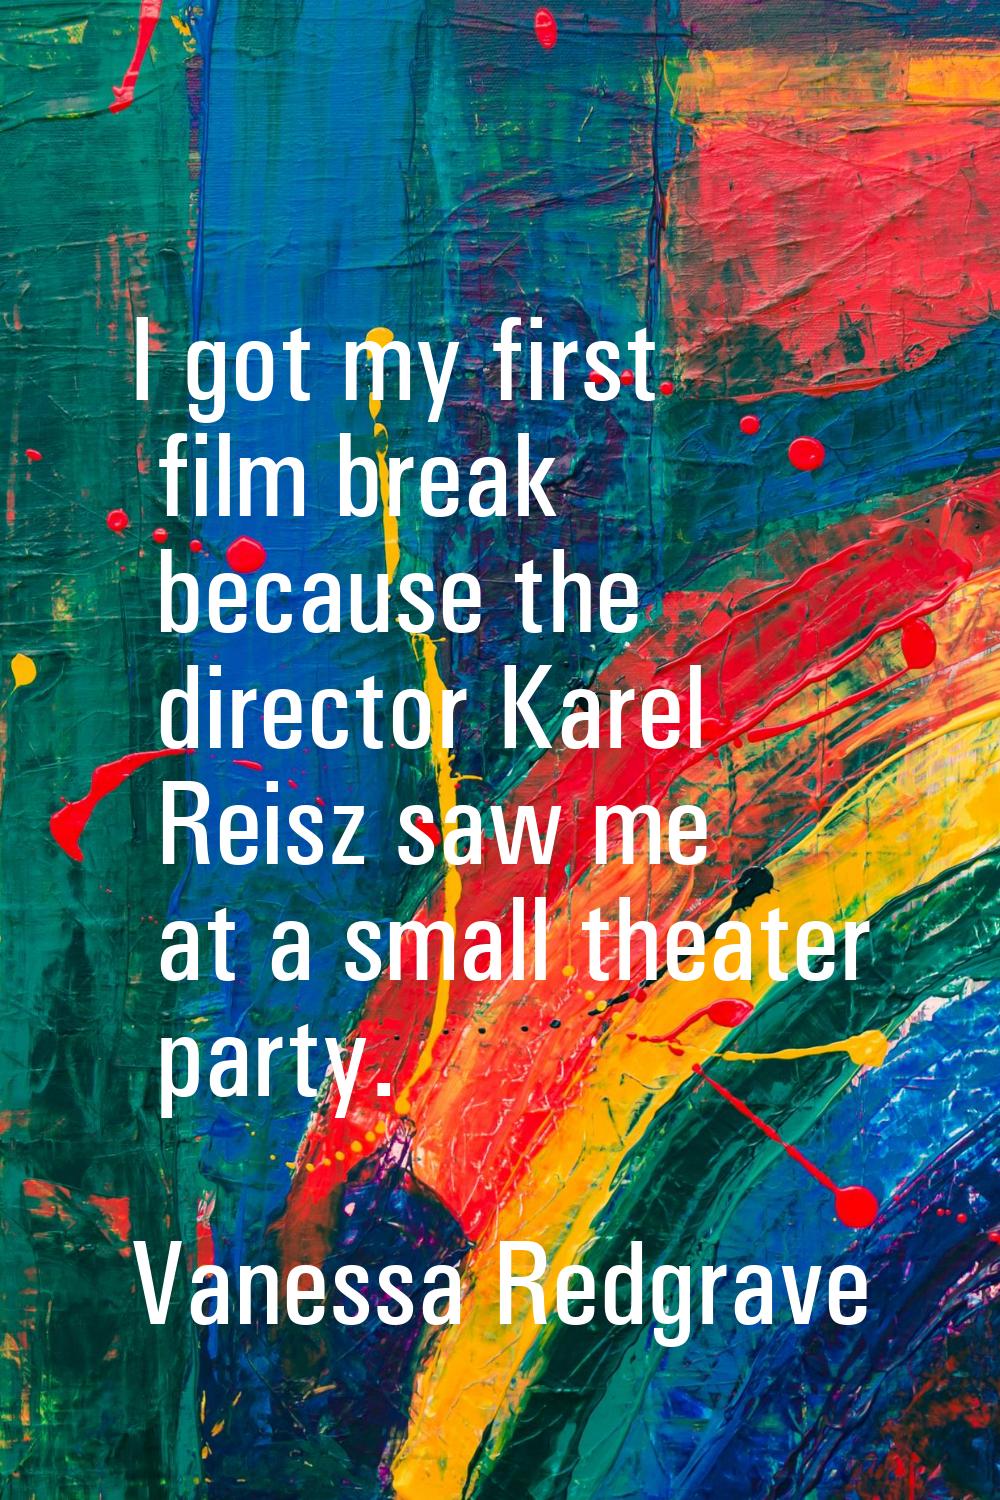 I got my first film break because the director Karel Reisz saw me at a small theater party.